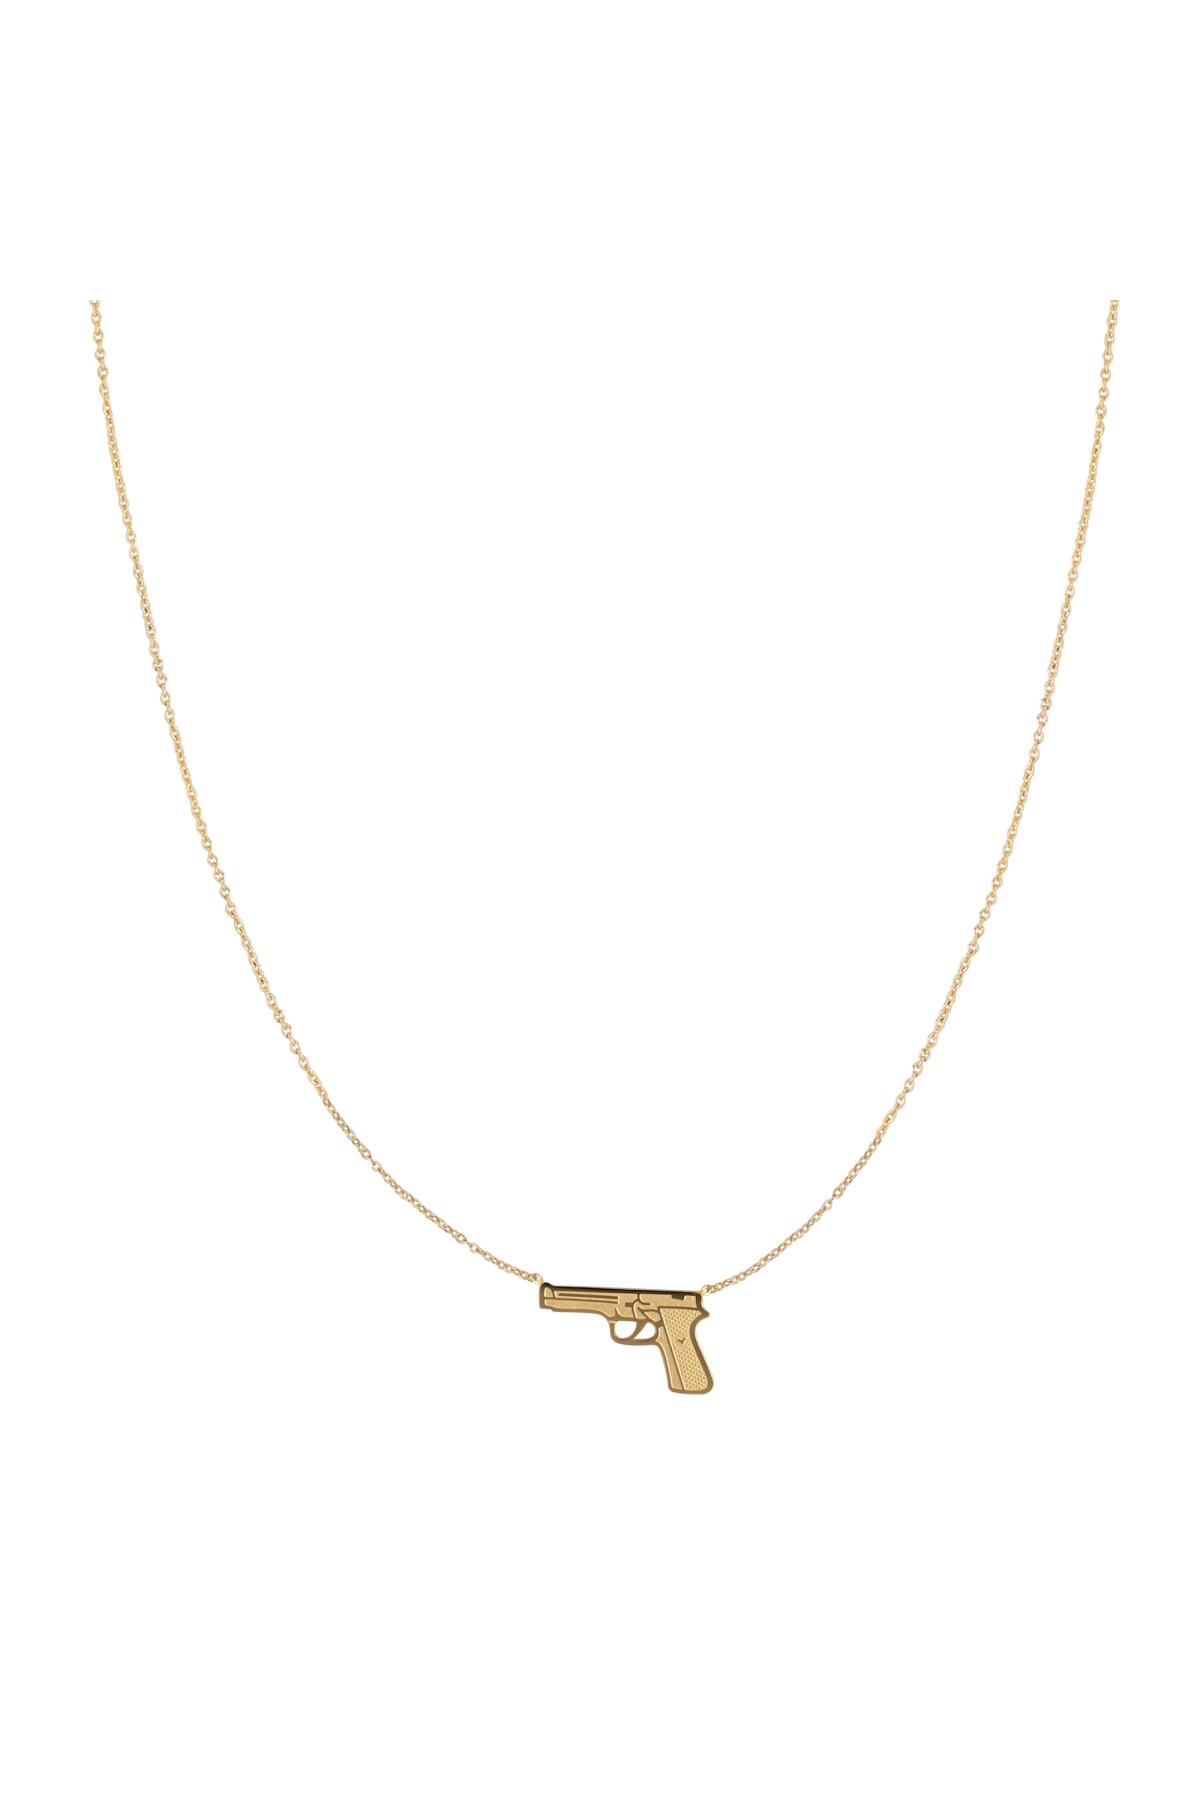 Stainless Steel Gun Shaped Pendant Necklace - Gold h5 